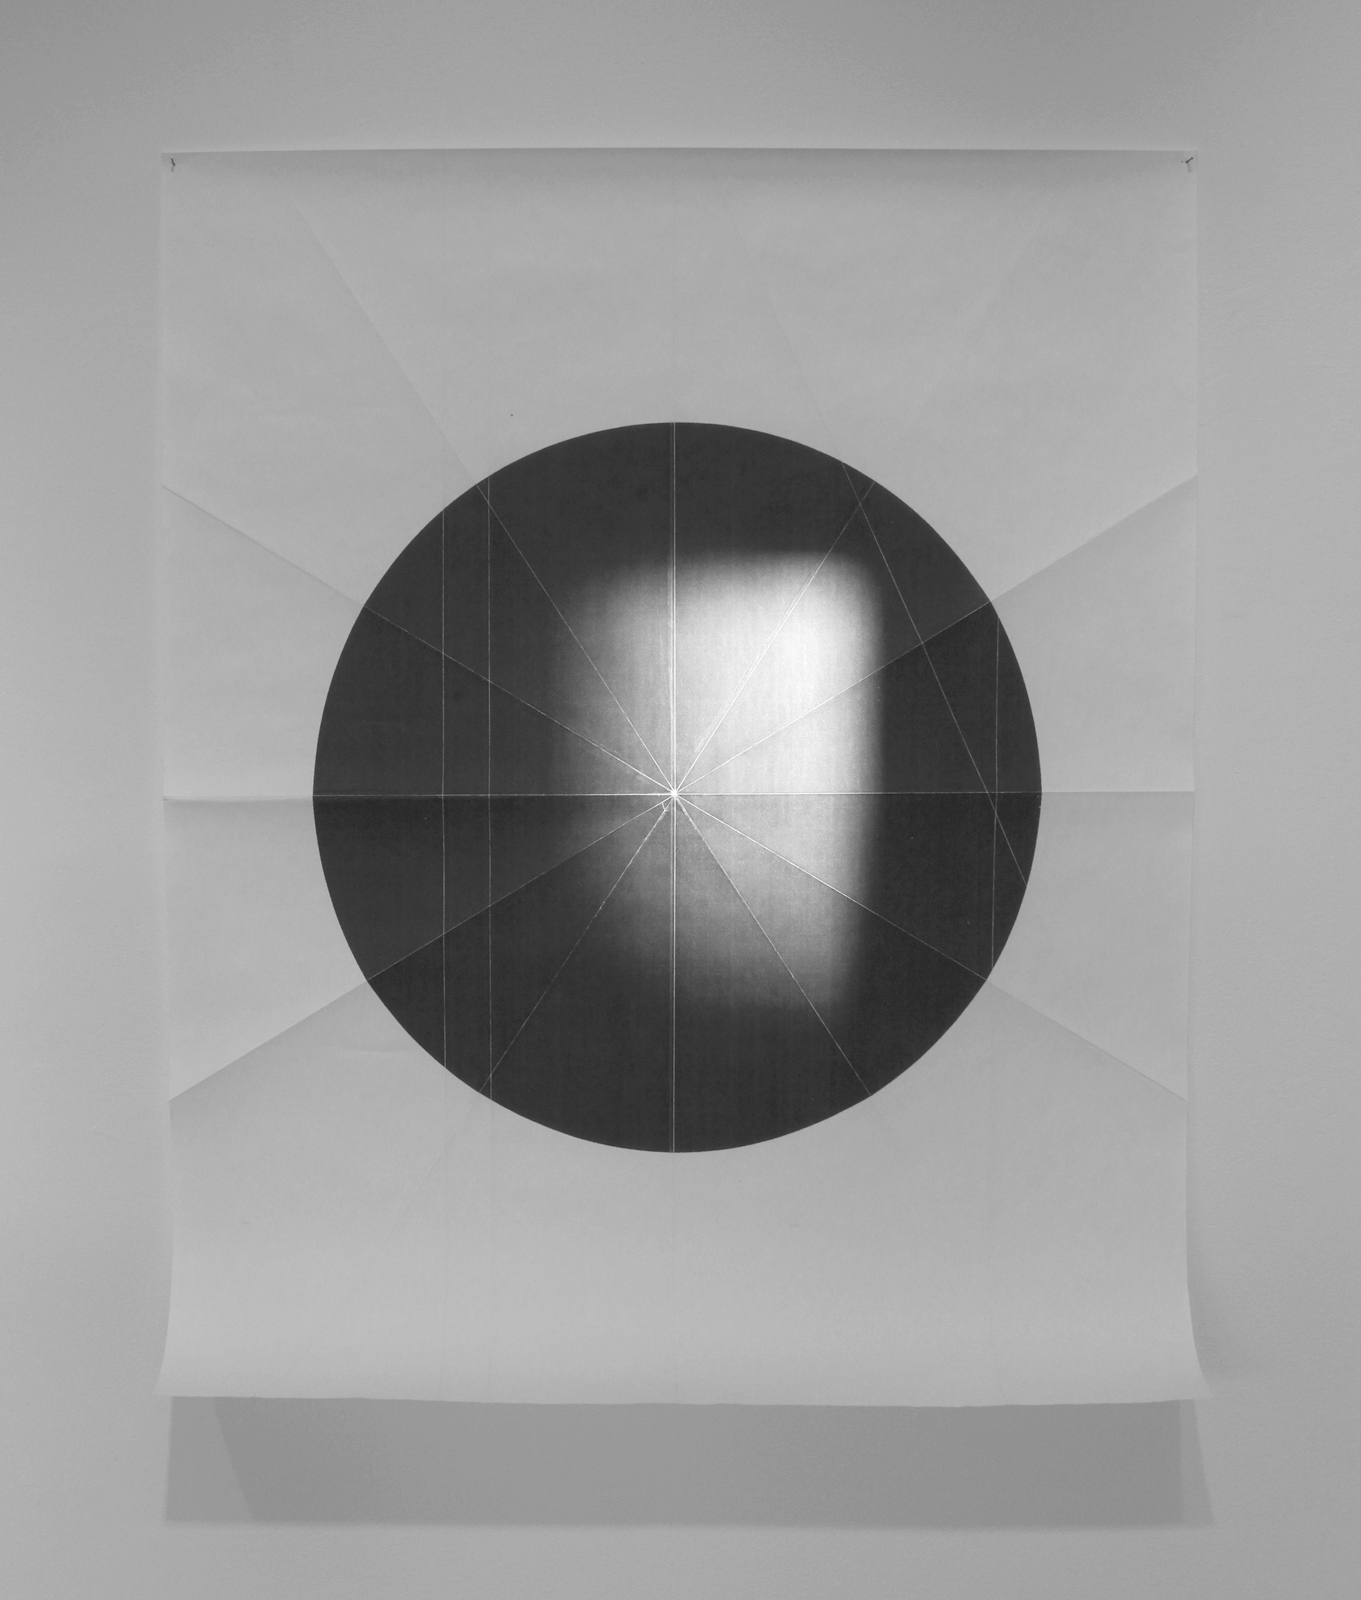    from the ongoing series: O/, Divided/Defined, Weights, Measures, and Emotional Geometry  2011, Folded photocopied circle (pictured here with sun) 107 x 63 inches  